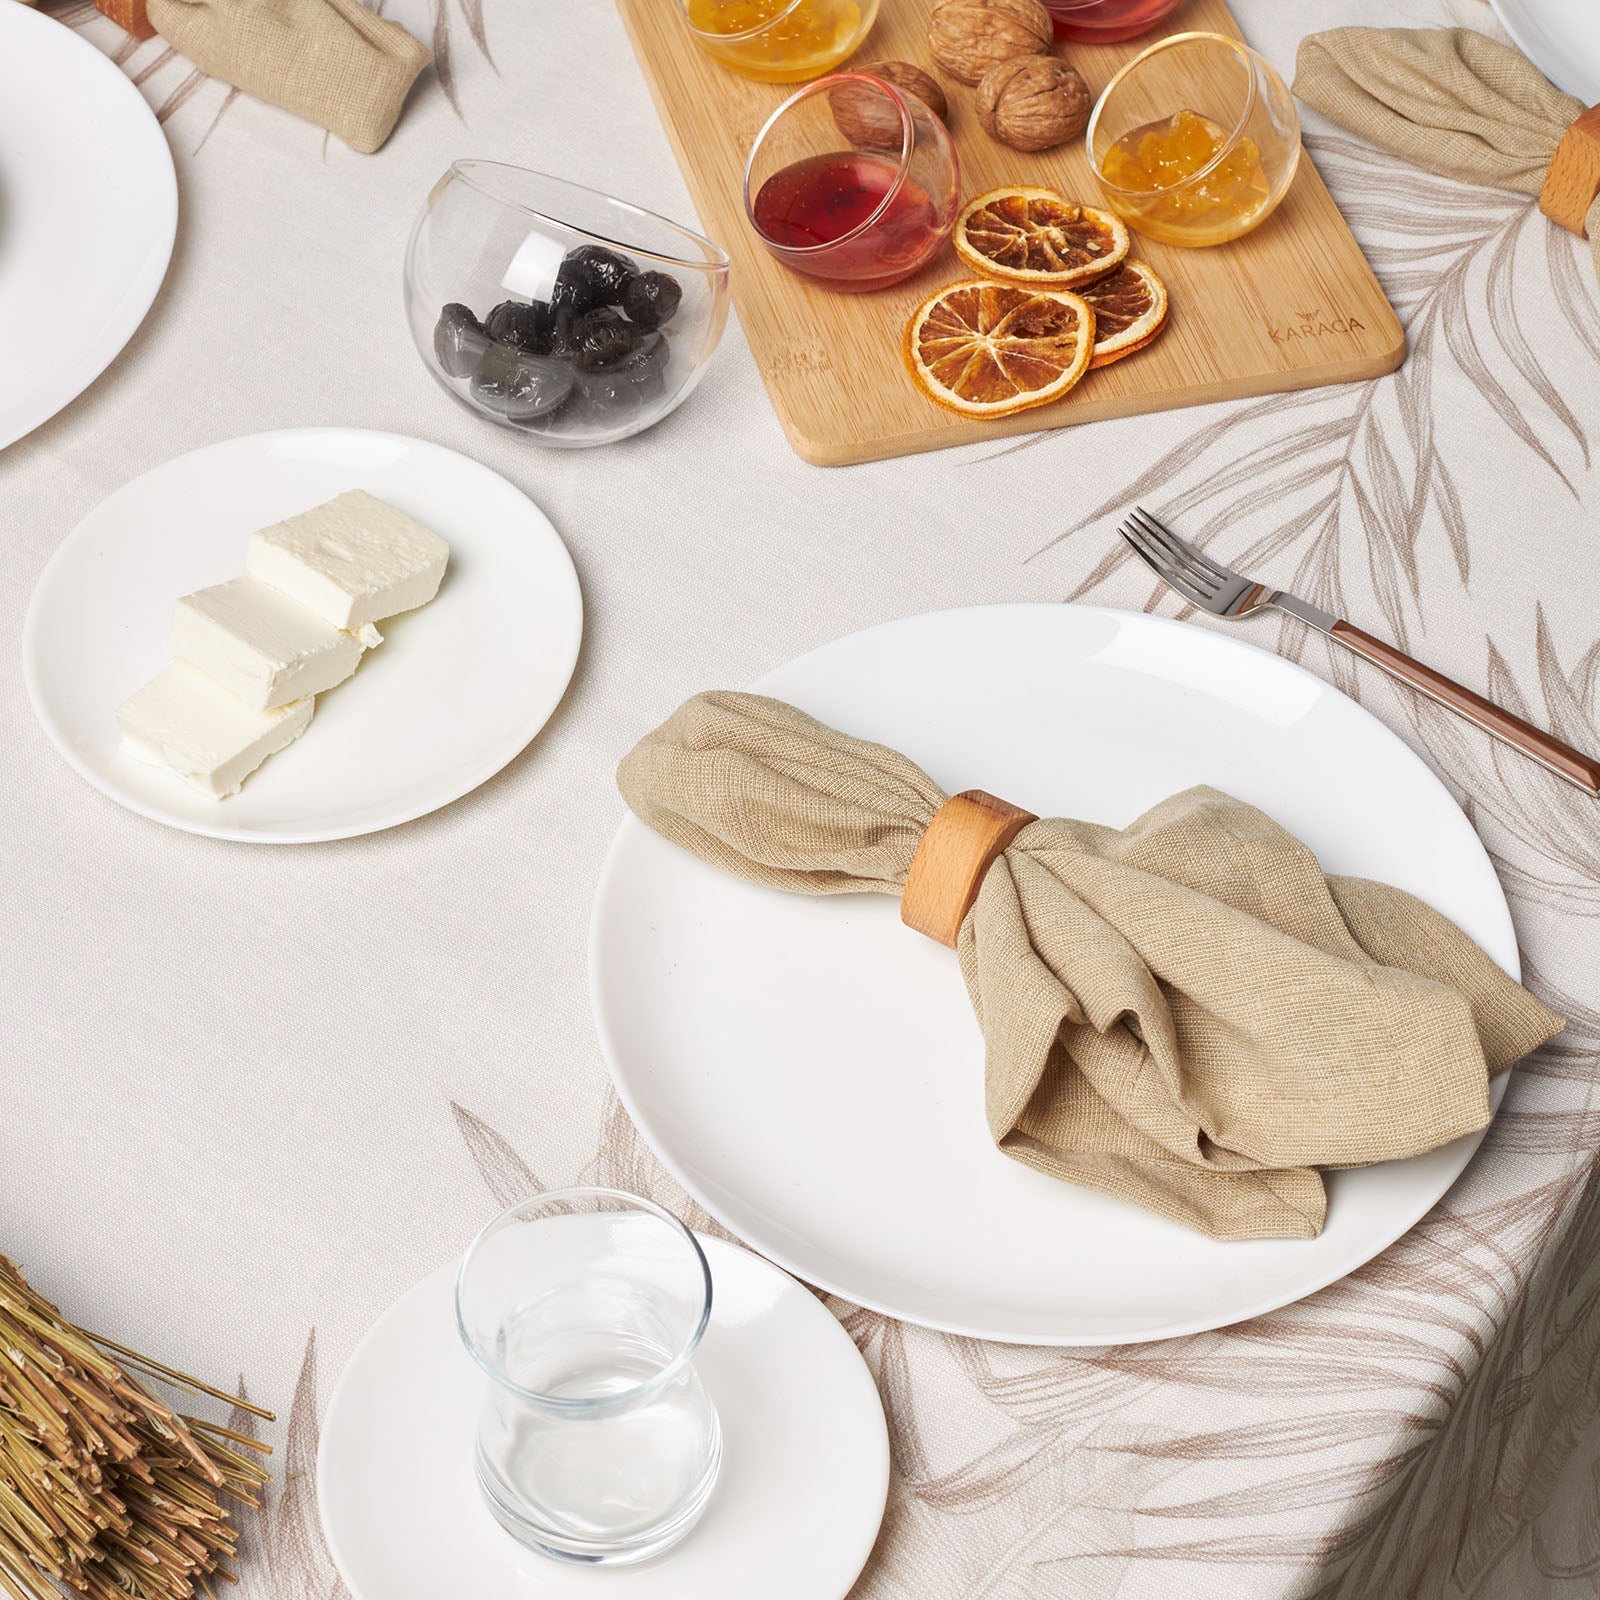 Darcy White 26 Pieces 6 Person Breakfast Set -  luxware-uk.myshopify.com